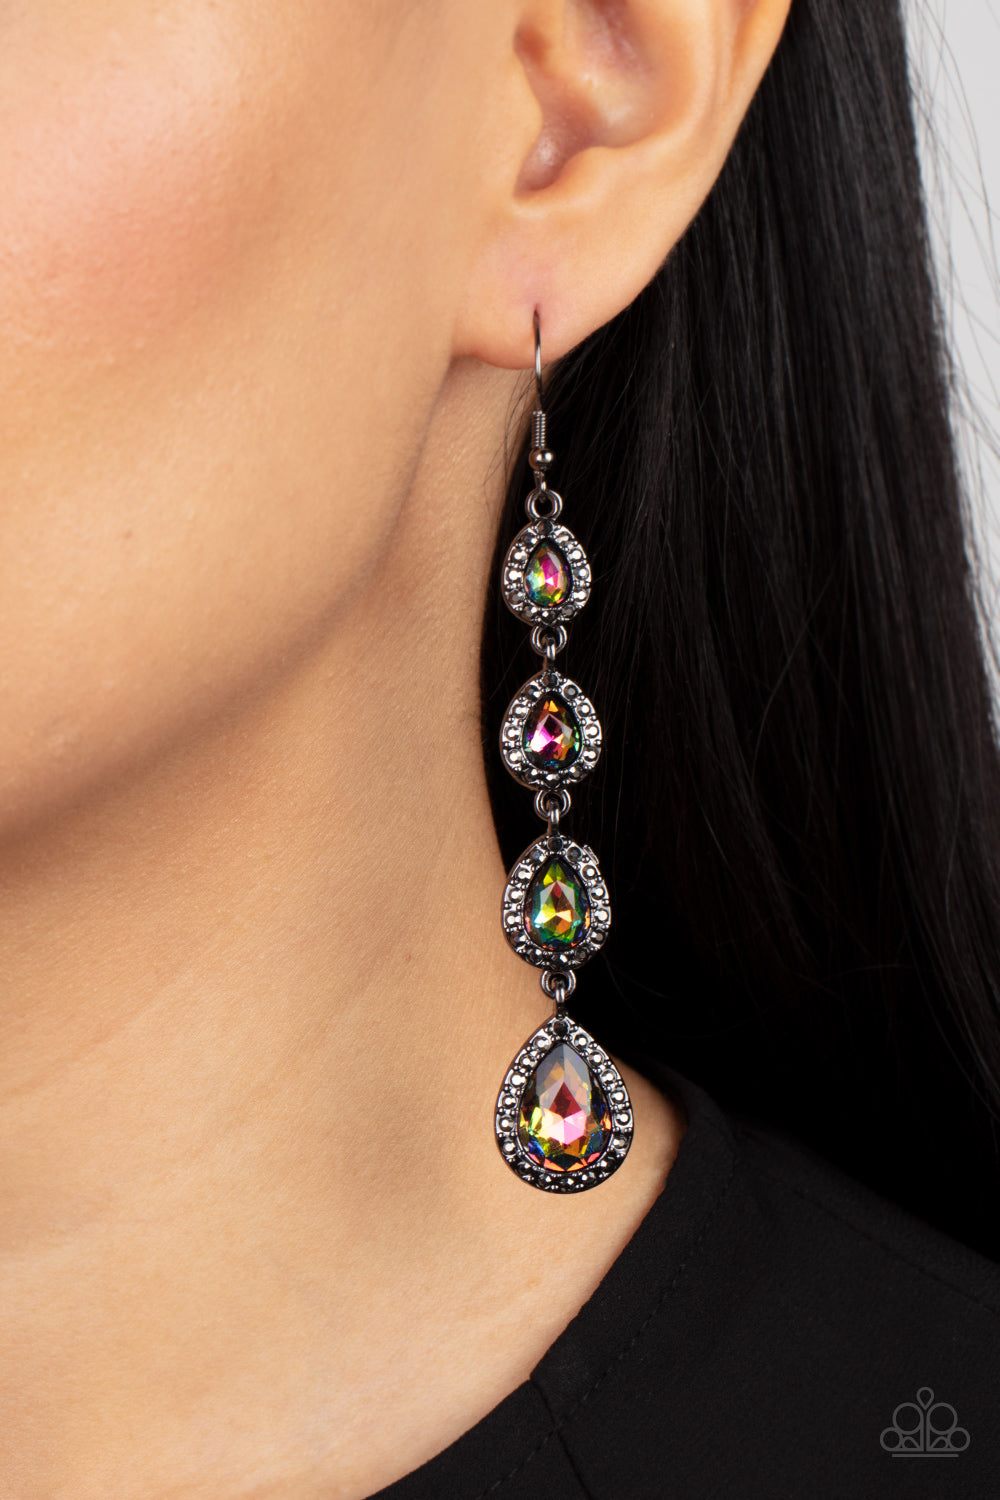 Confidently Classy - Multi Earrings - Paparazzi Accessories